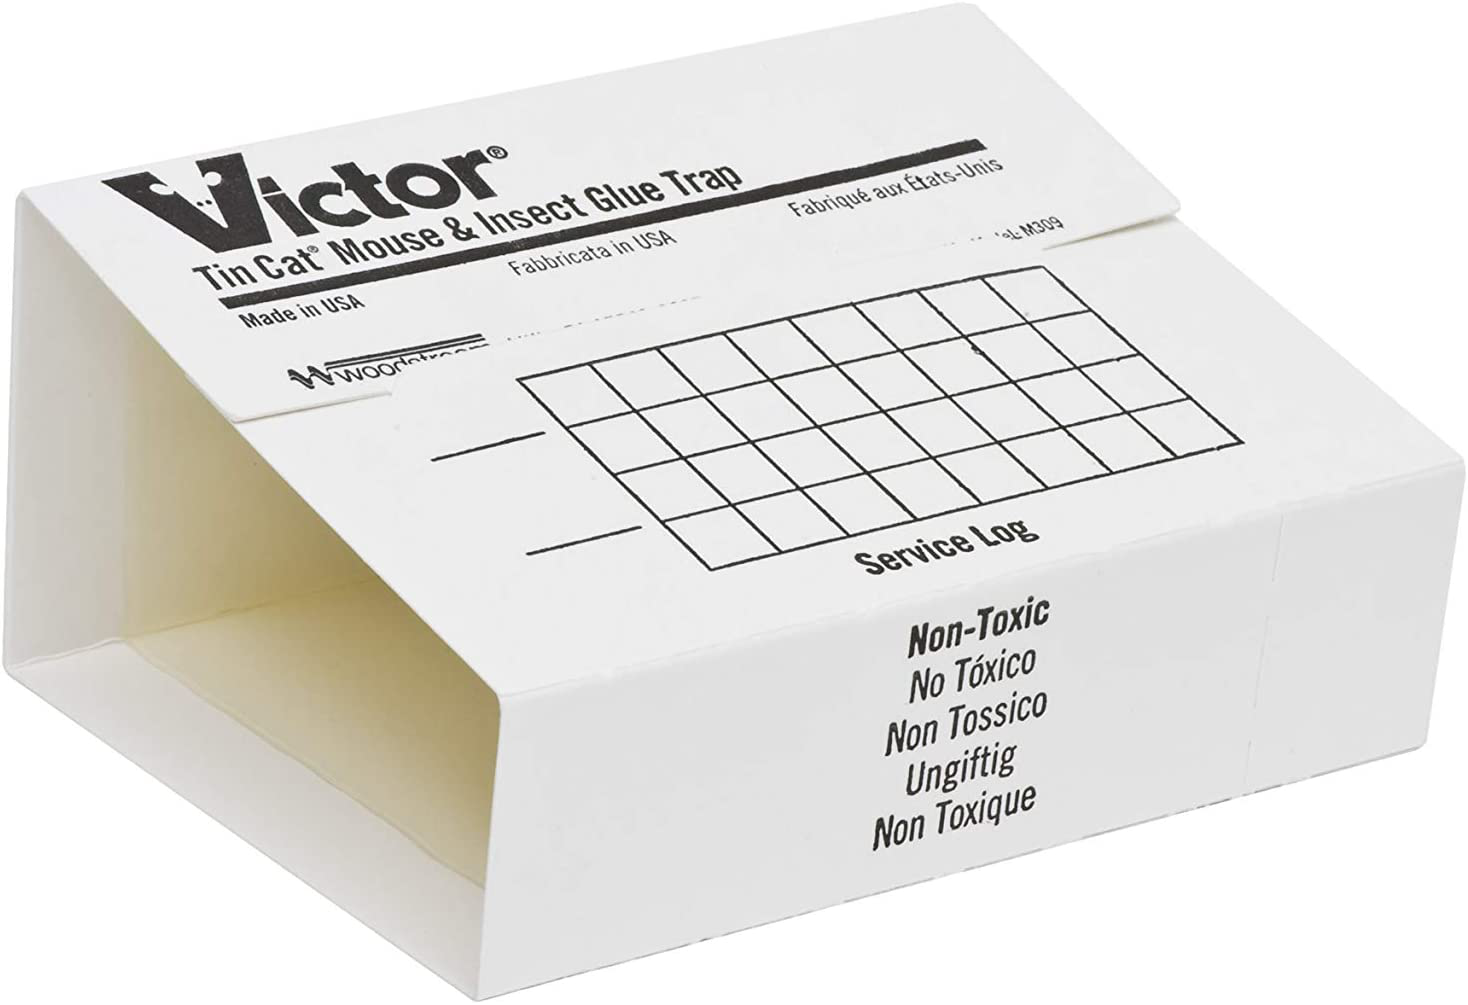 Victor M309 72 Pack Insect & Mouse Glue Board, White